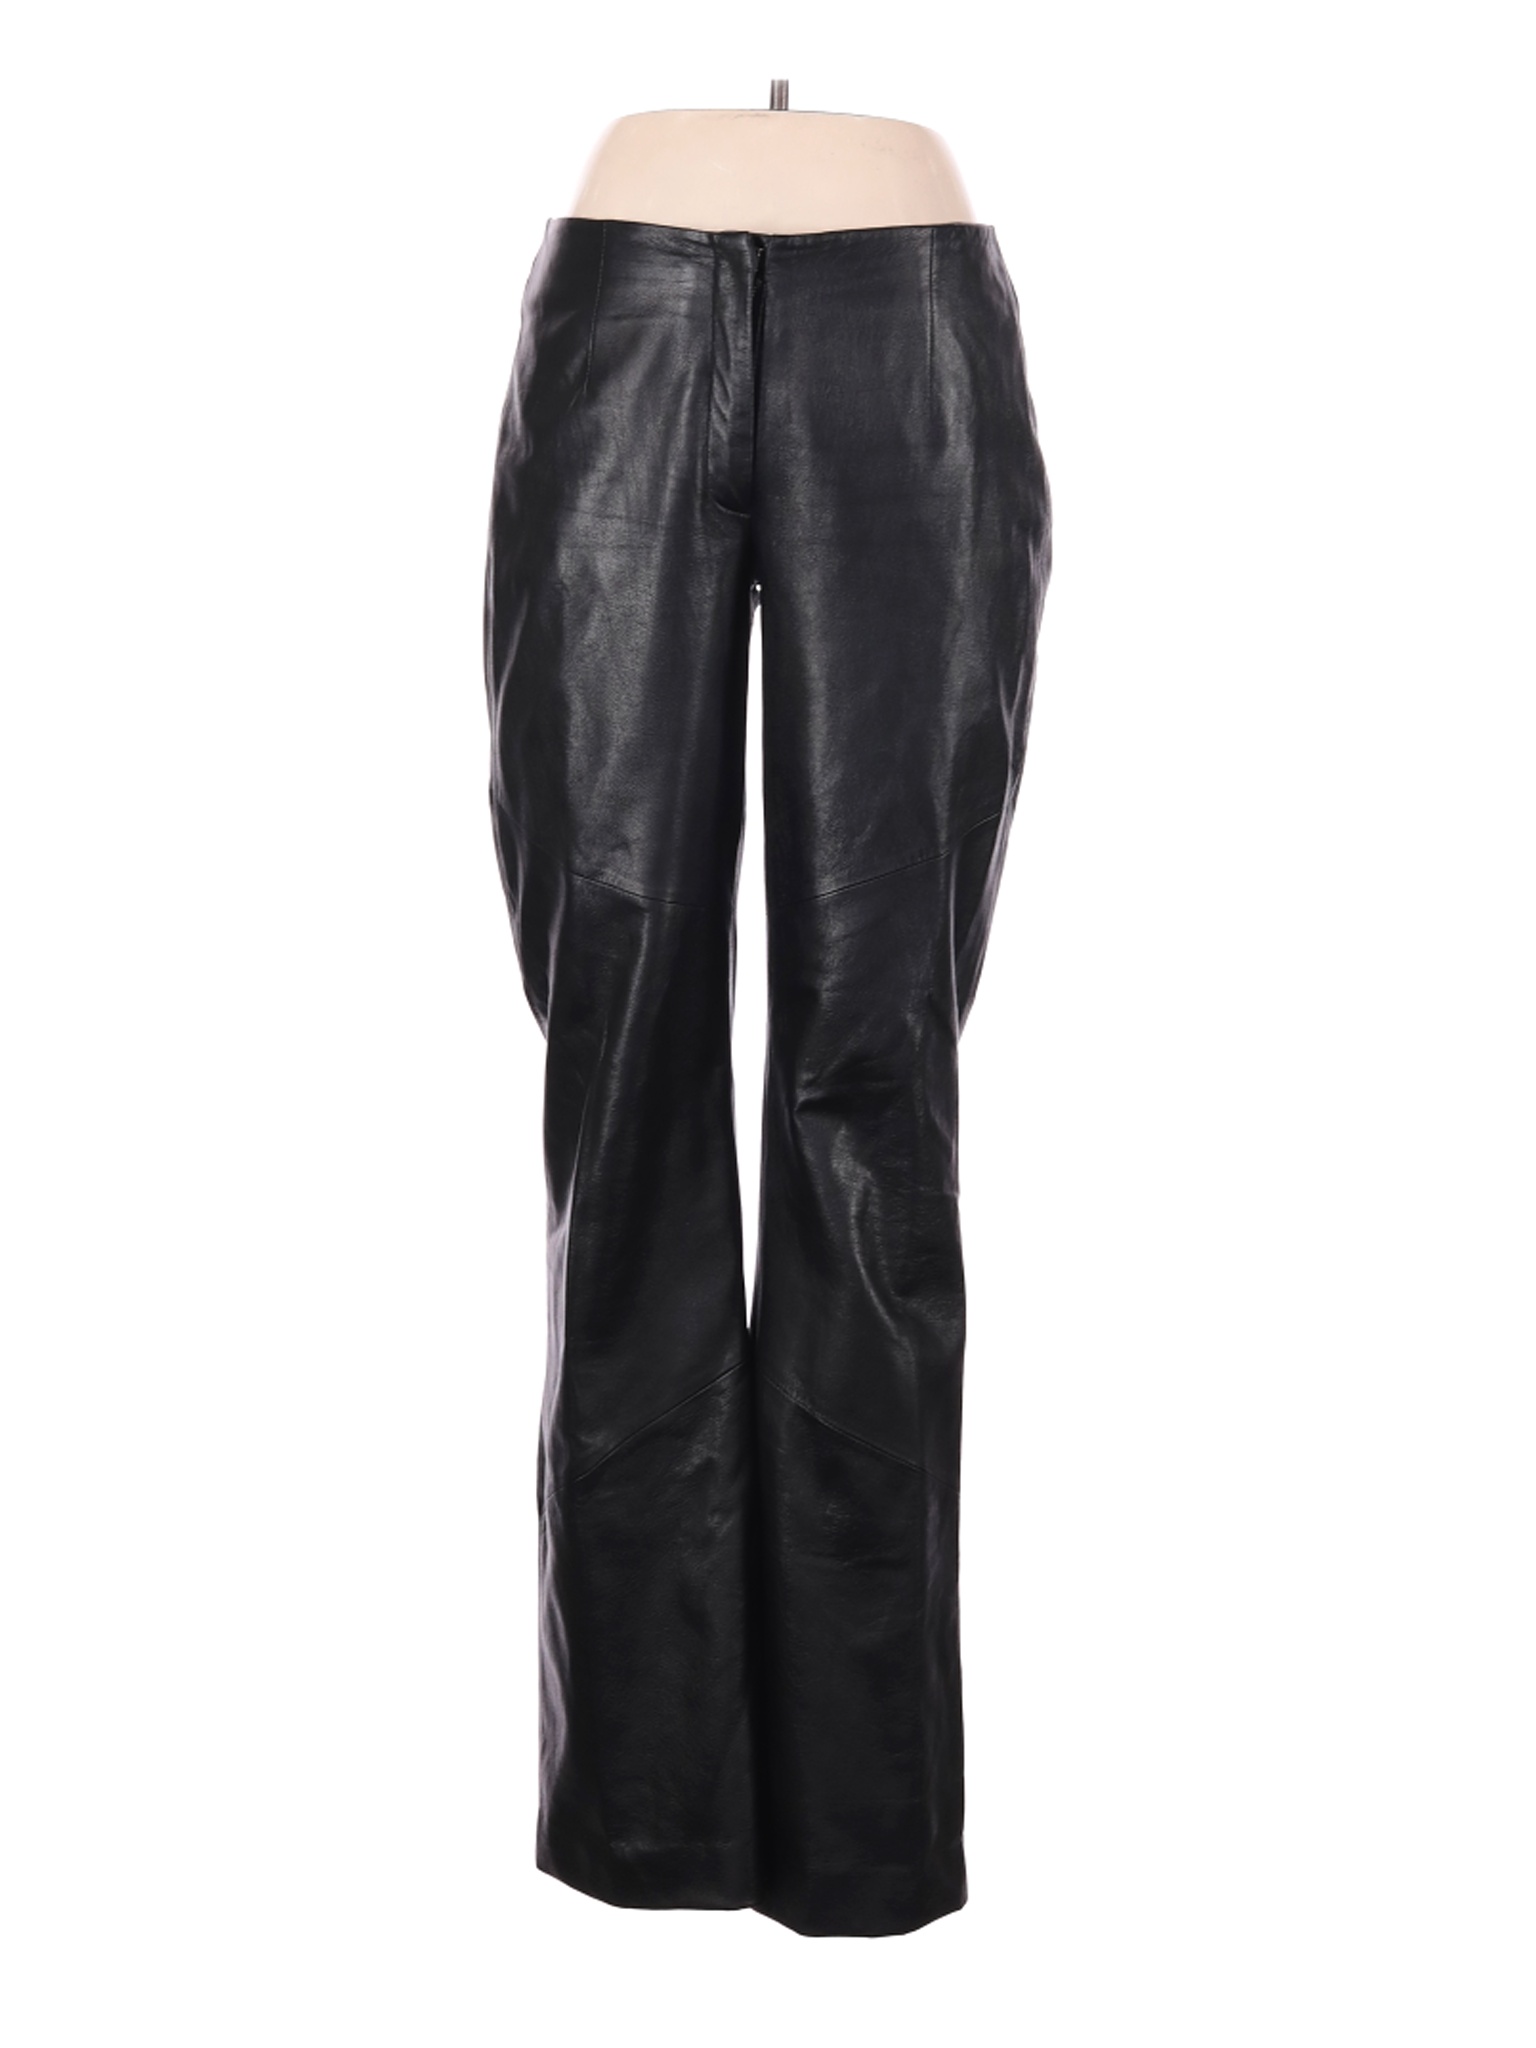 Wilsons Leather 100% Leather Solid Black Leather Pants Size 8 - 65% off ...